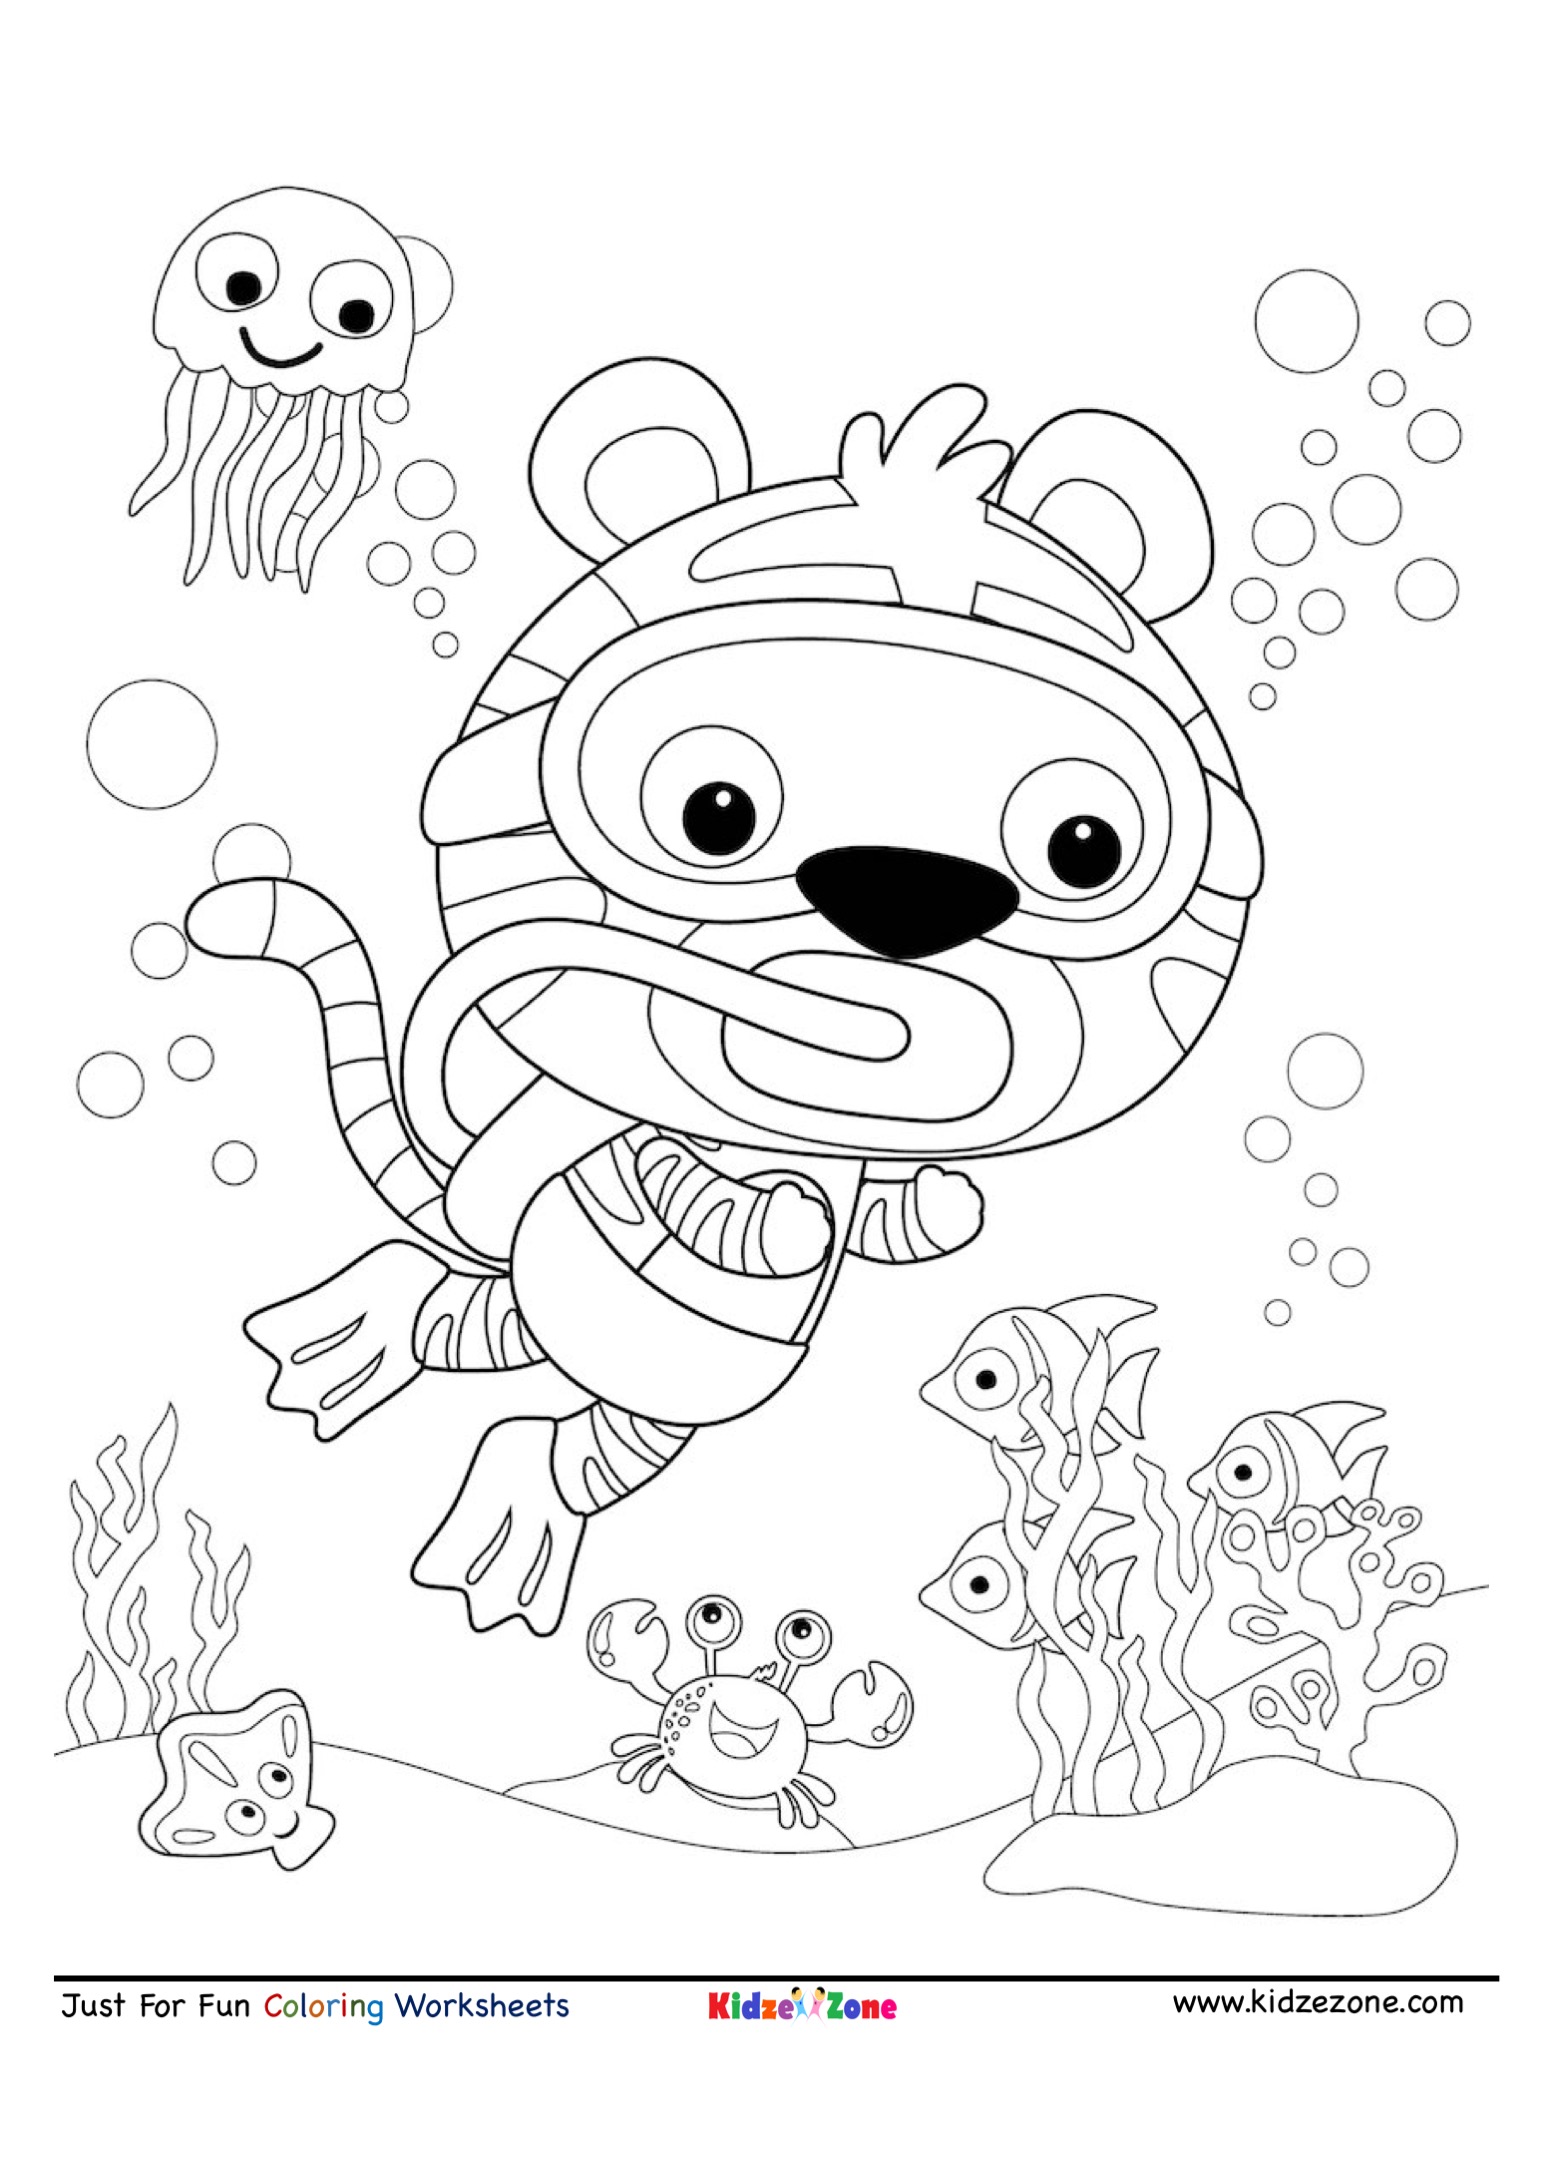 Tiger under water scuba diving coloring page